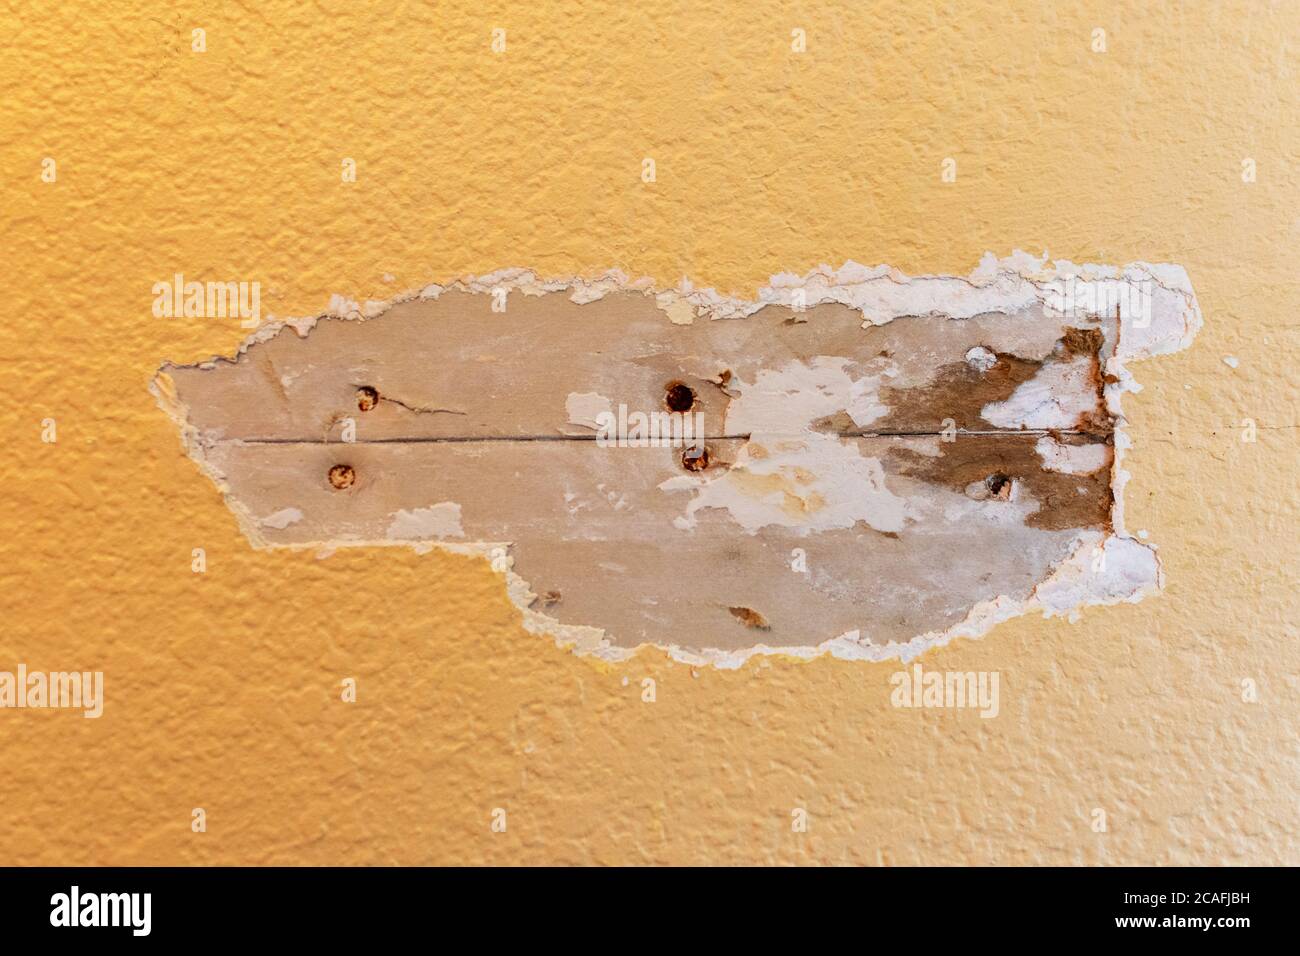 Drywall joint crack repair in progress. Excavated damaged area. Exposed drywall seam with rusty nails. Stock Photo